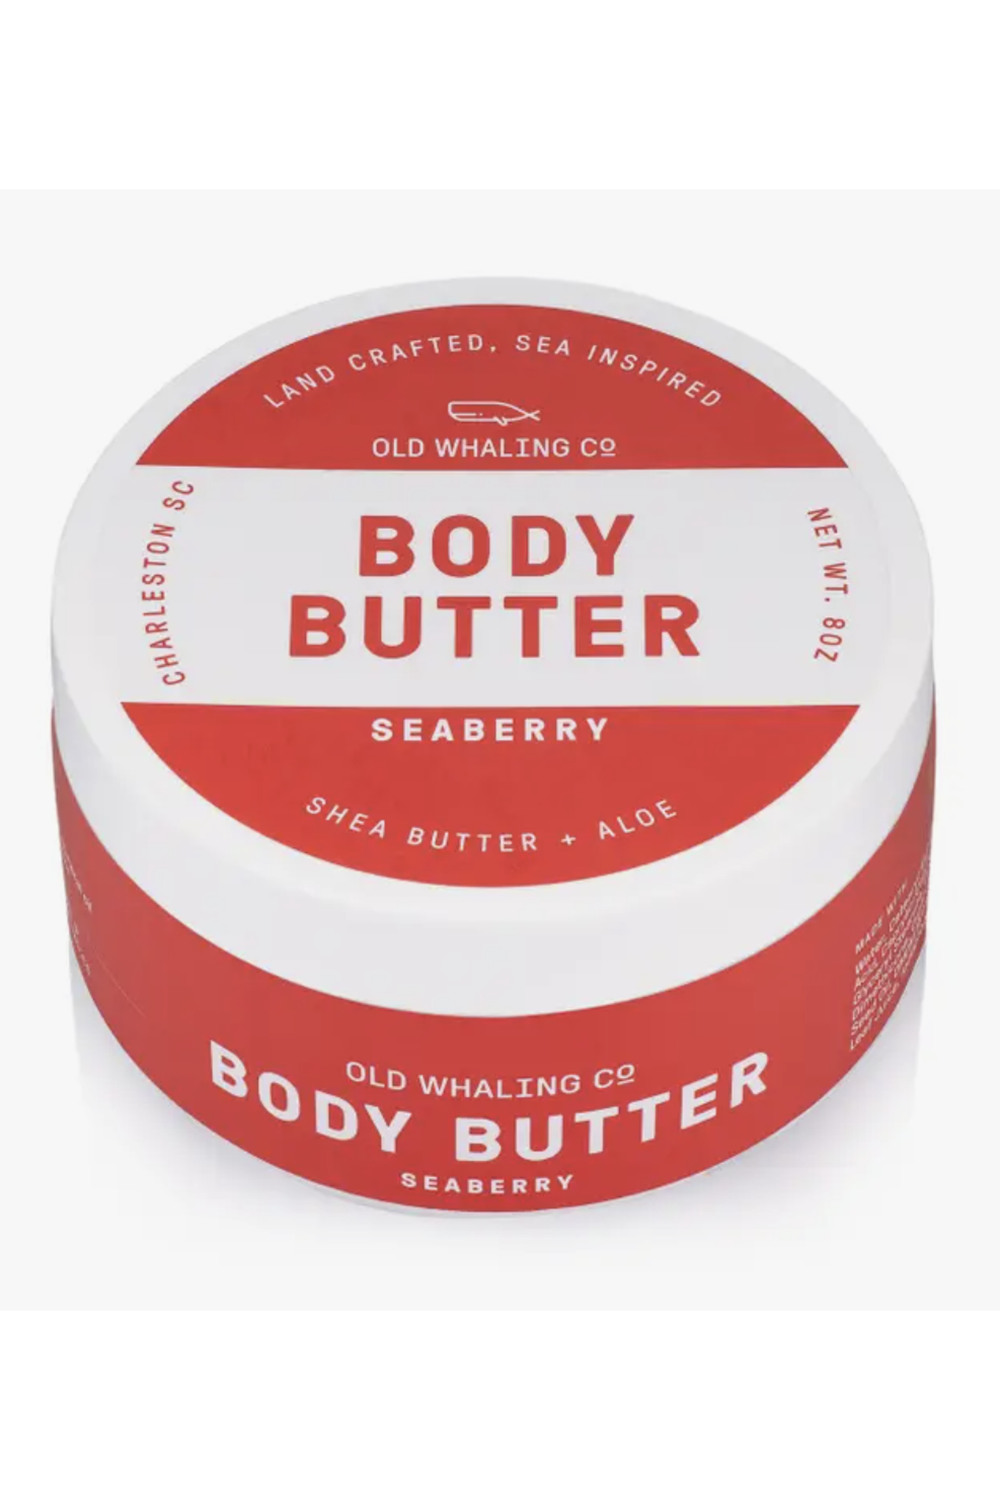 Body Butter - Seaberry